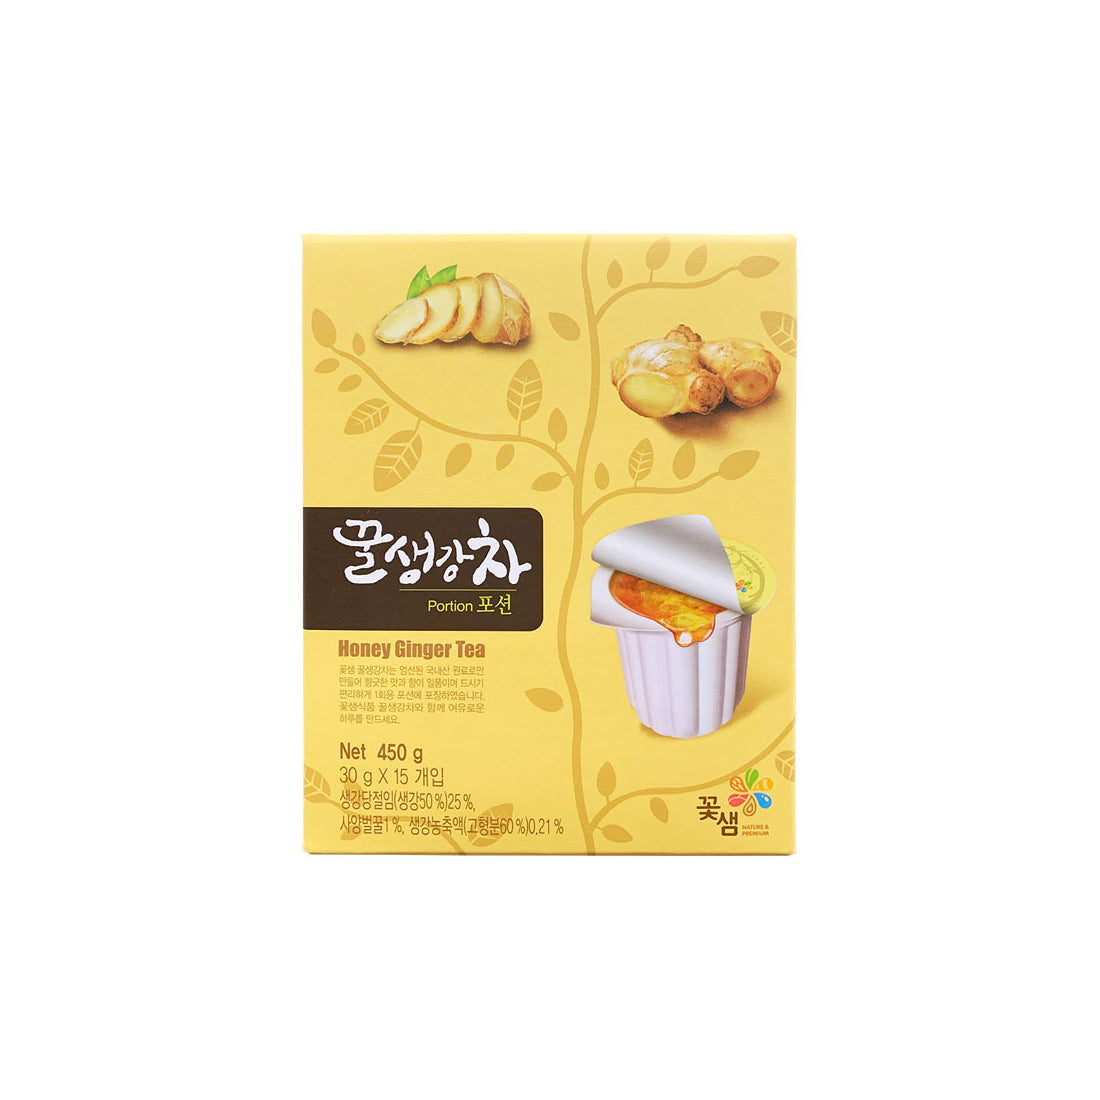 Honey Ginger Tea In Plastic Cup 6/15t/30g 꽃샘 꿀생강차 포션